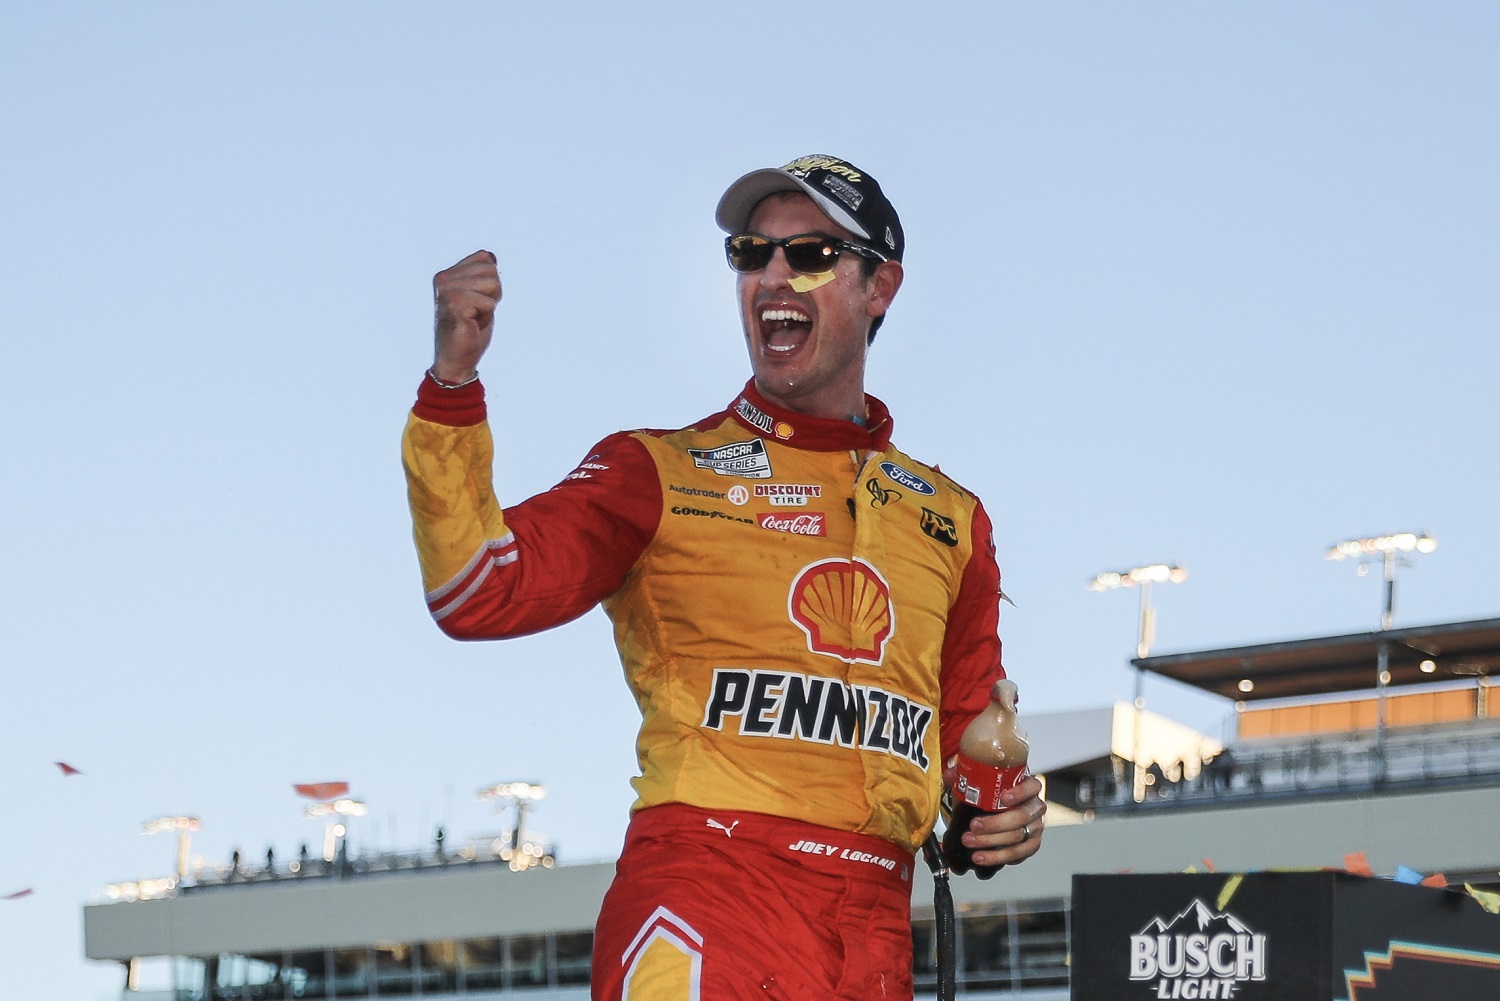 Joey Logano celebrates after winning the 2022 NASCAR Cup Series championship at Phoenix Raceway on Nov. 6, 2022. | Meg Oliphant/Getty Images